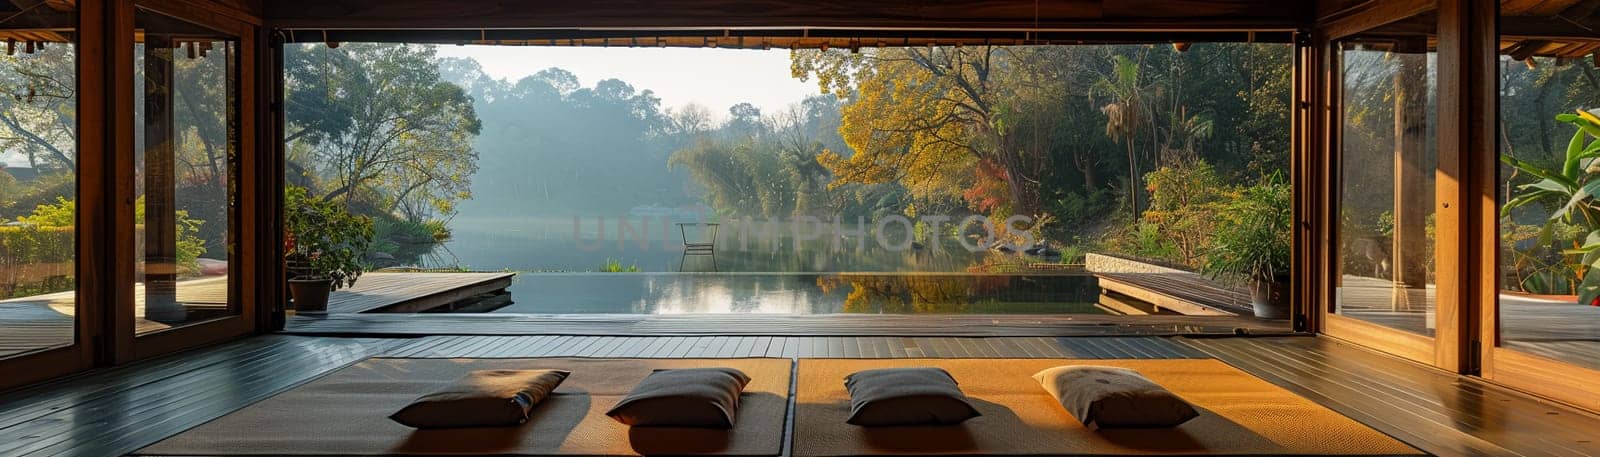 Peaceful Yoga Retreat in Nature with Soft Edges of Serenity by Benzoix